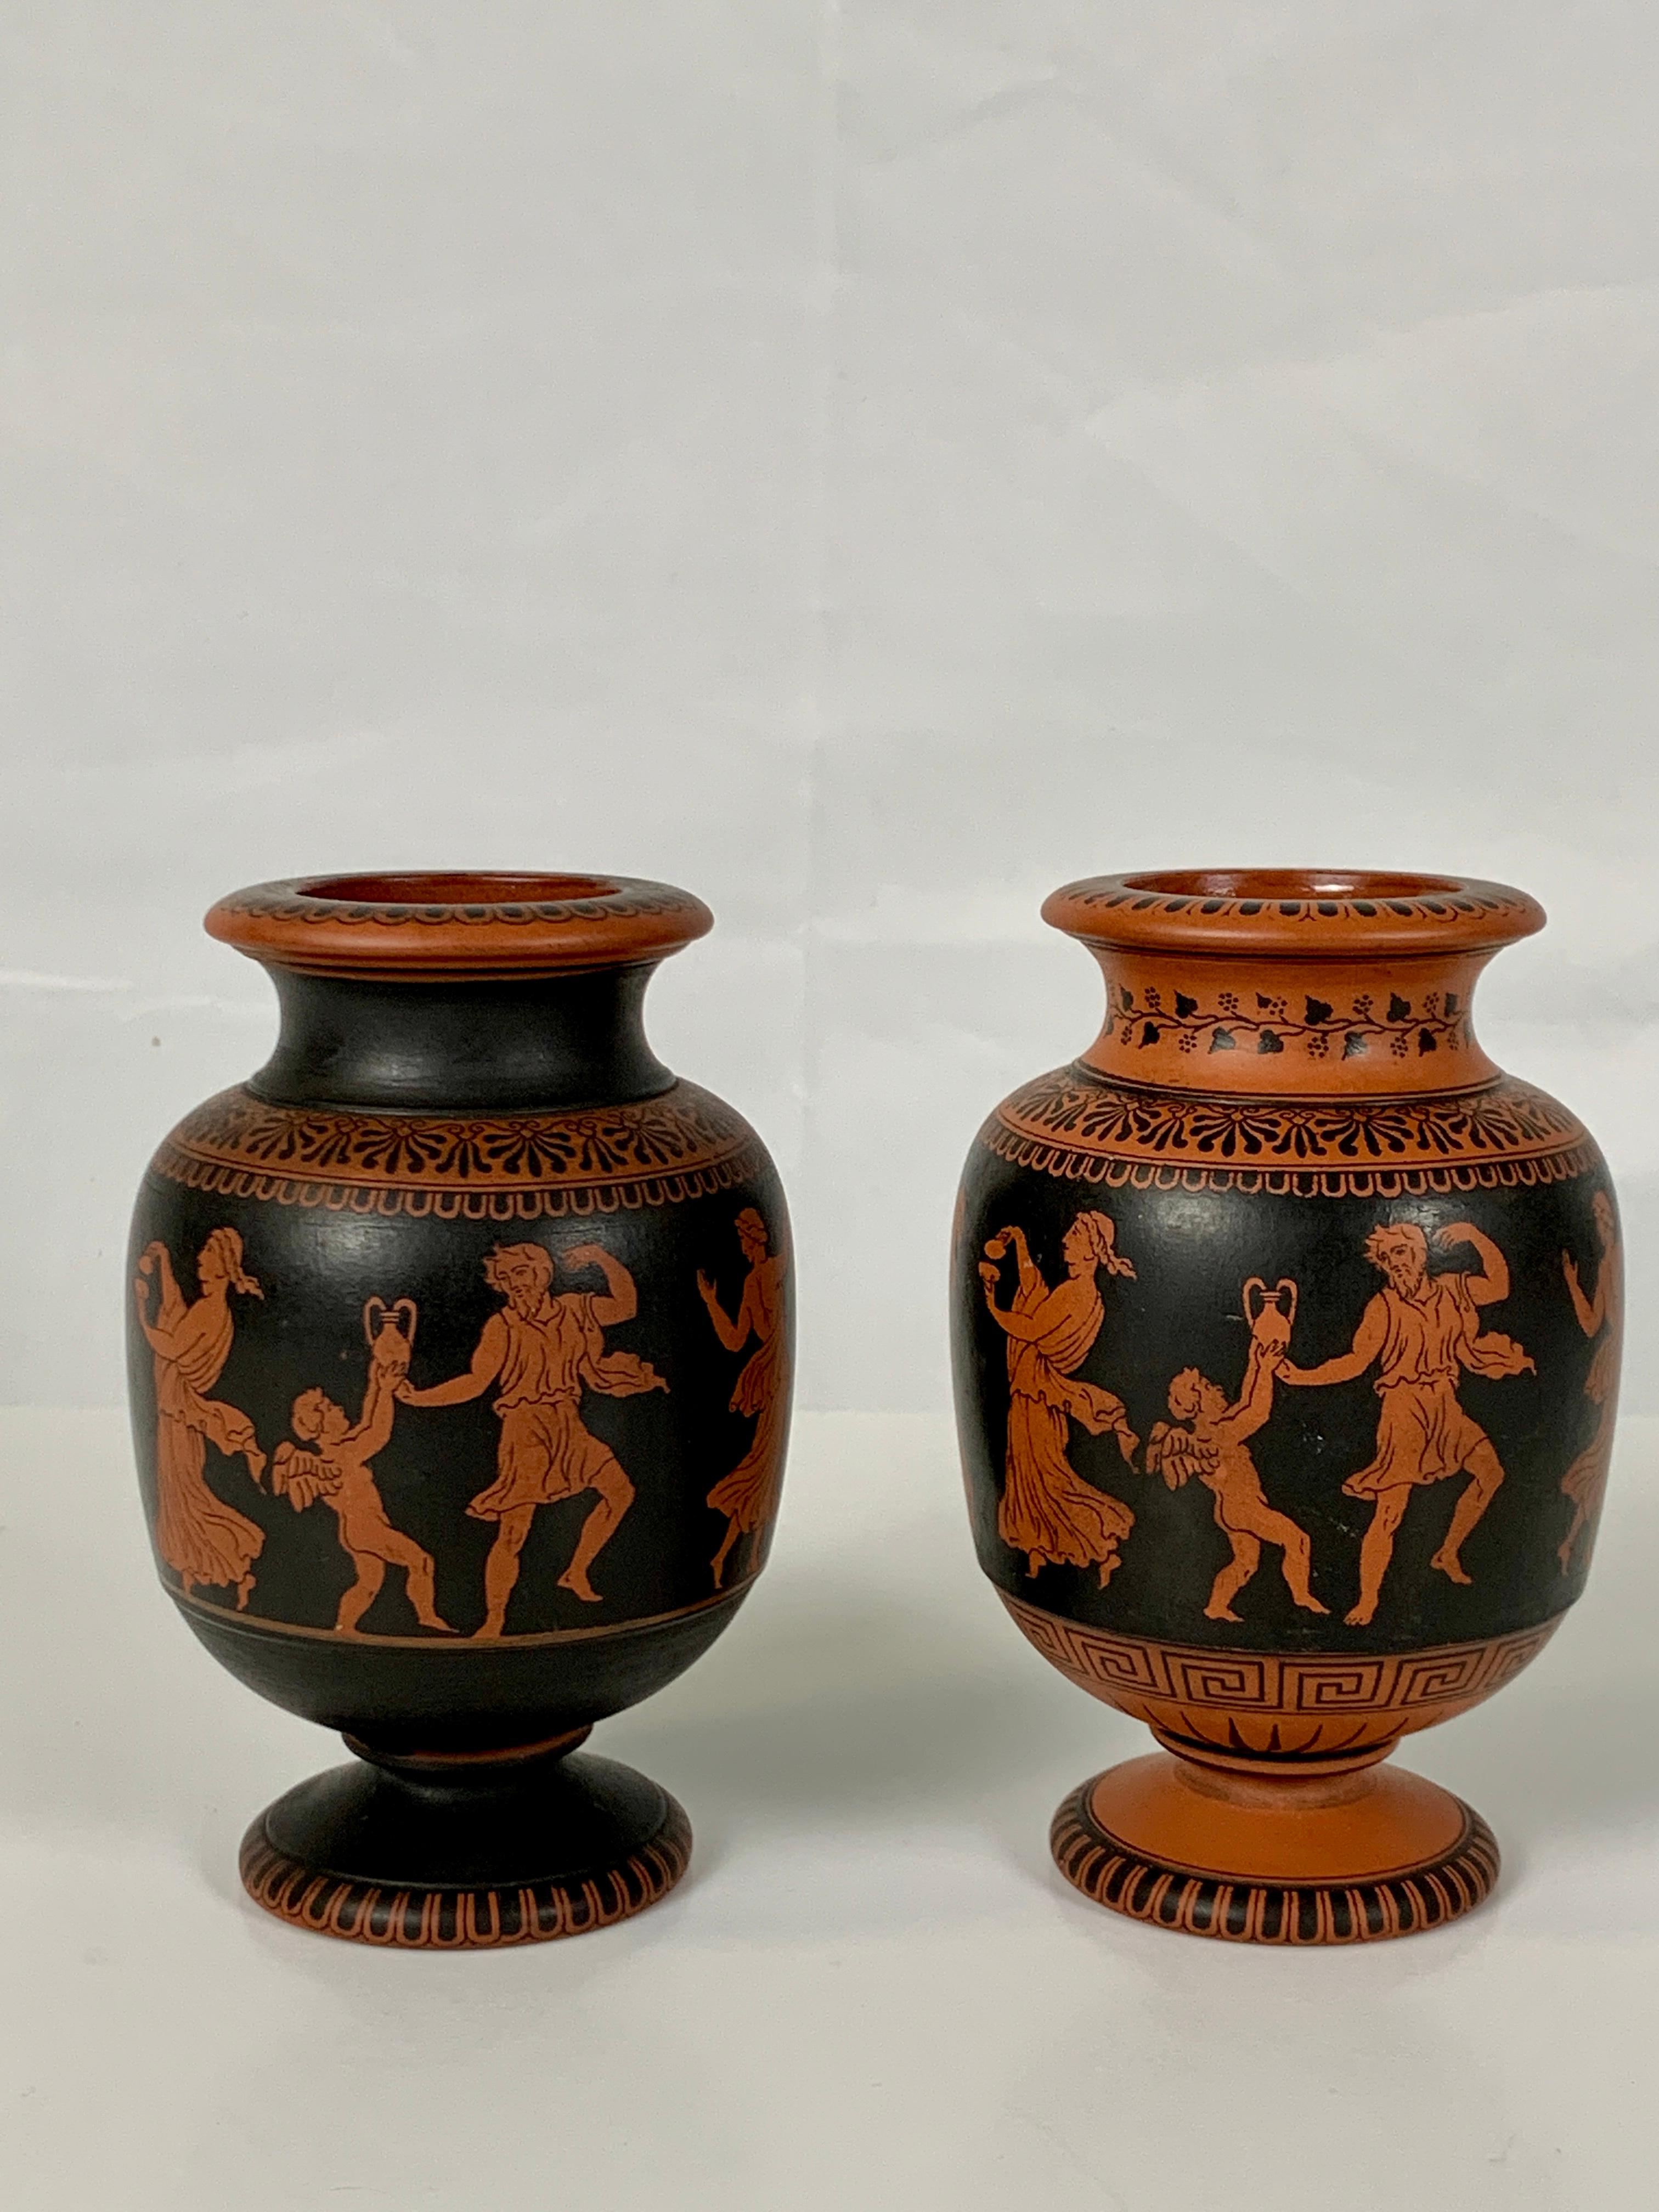 A lovely pair of small terracotta vases showing a celebration with classical figures in orange silhouette dancing and playing instruments on a black ground. The neoclassical decoration is continued on the shoulders, each of which has a band of